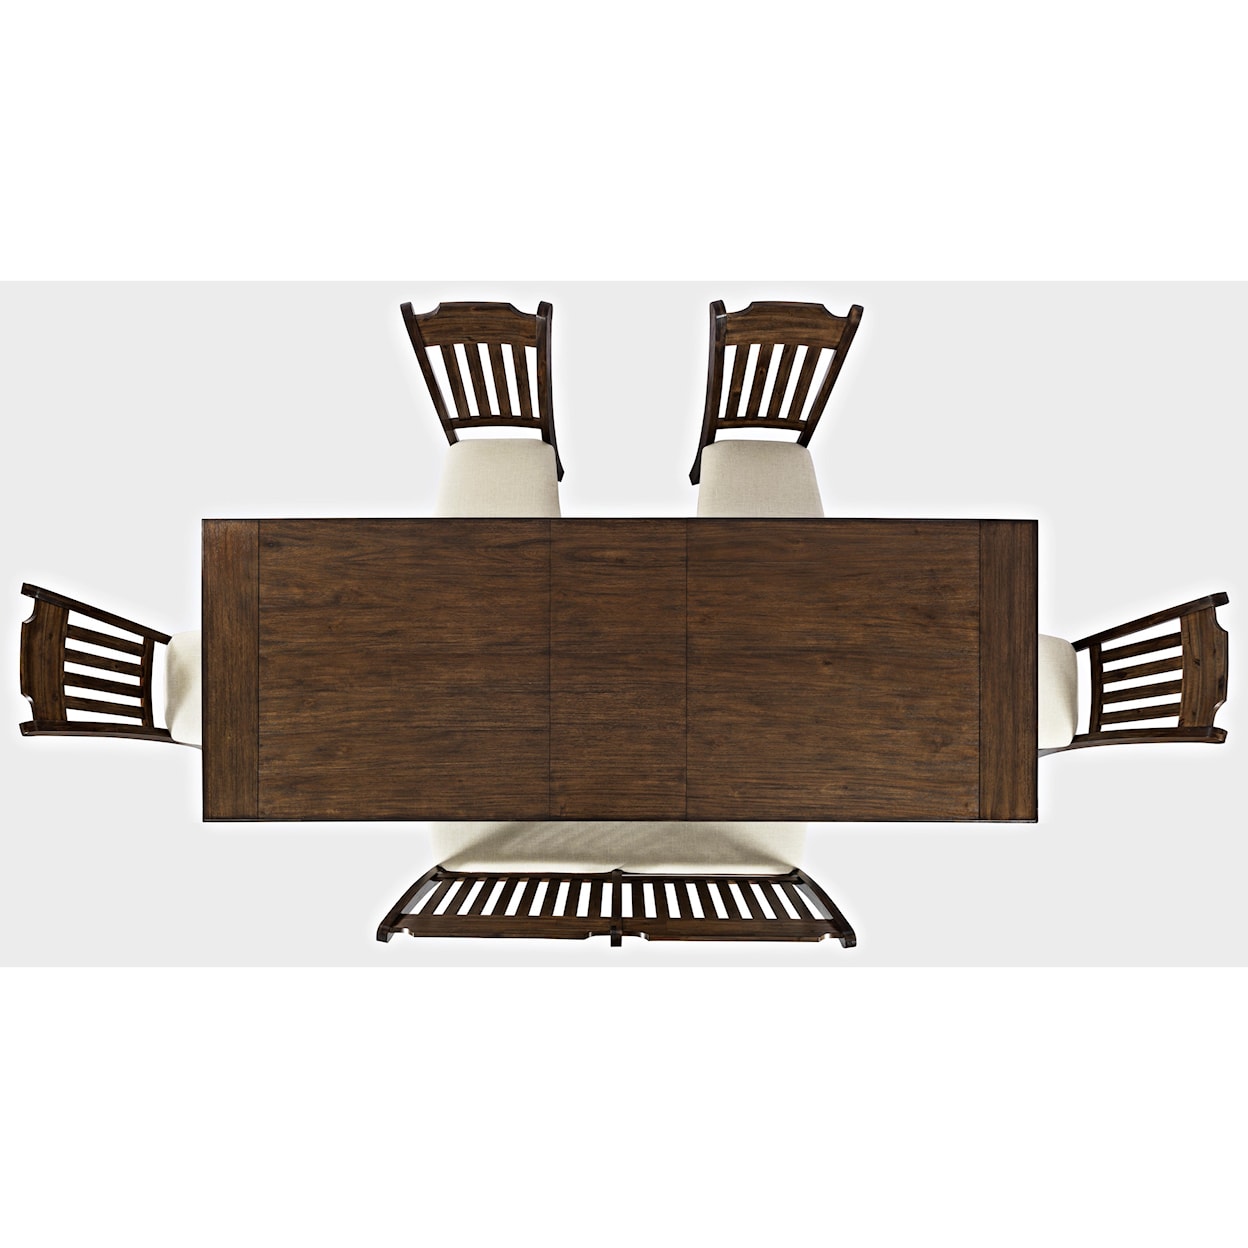 VFM Signature Bakersfield 6-Piece Dining Table and Chair Set